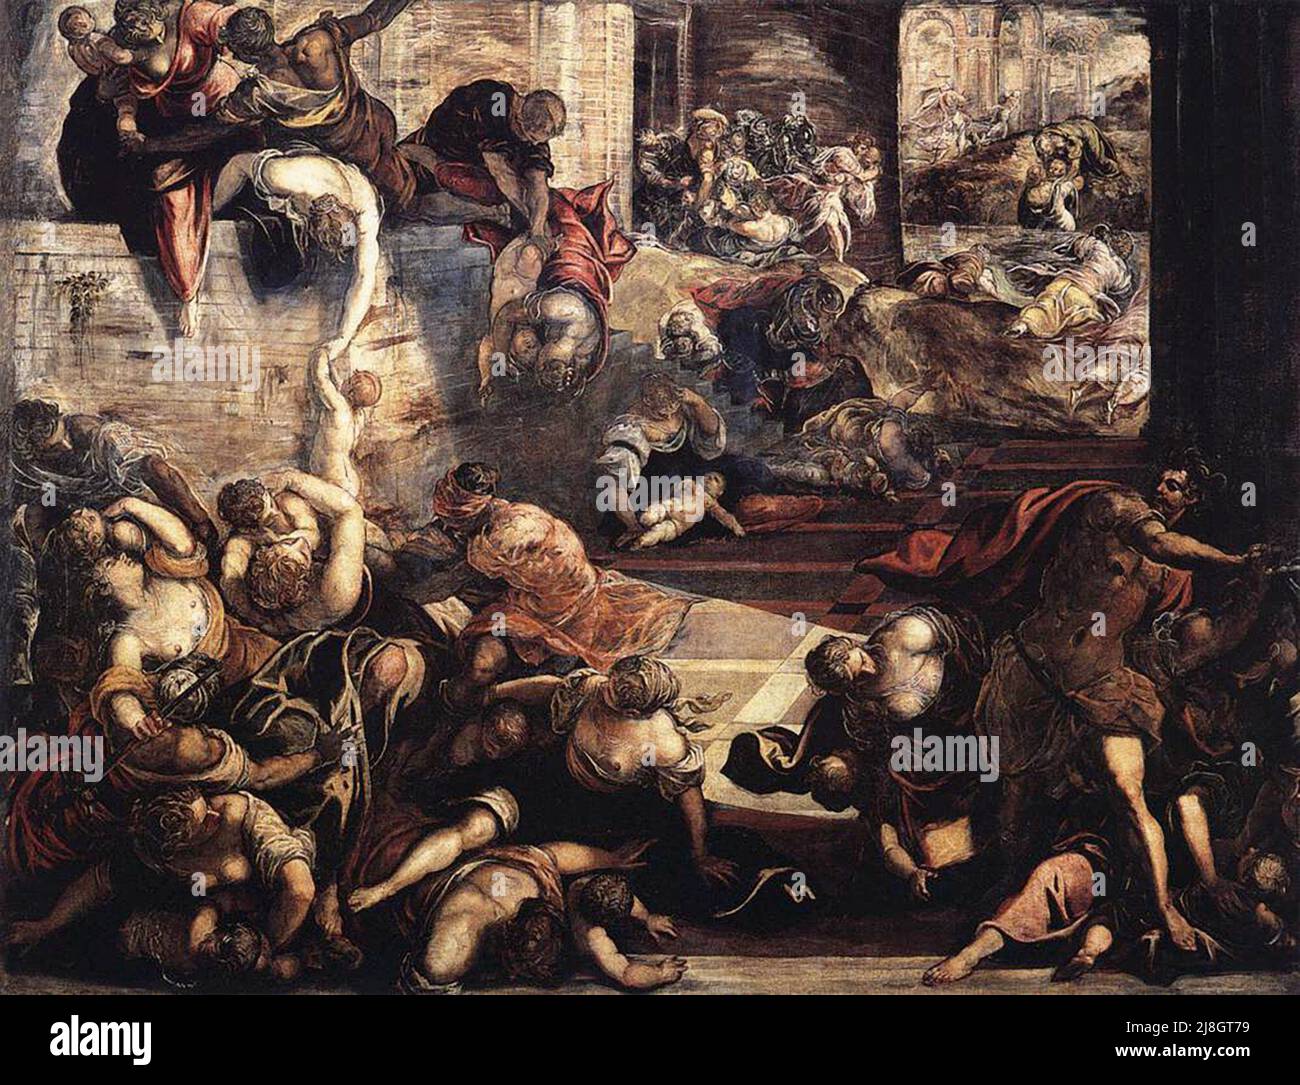 The Massacre of the Innocents  by Rubens. In this christian myth, the Three Magi asked where to find the newborn 'King of the Jews'. The Roman ruler Herod felt his position threatened amd ordered the murder of all baby boys. The father of Jesus was warned in a rea, of the event and was advised to go to Egypt, in the episode known as The Flight Into Egypt. Stock Photo